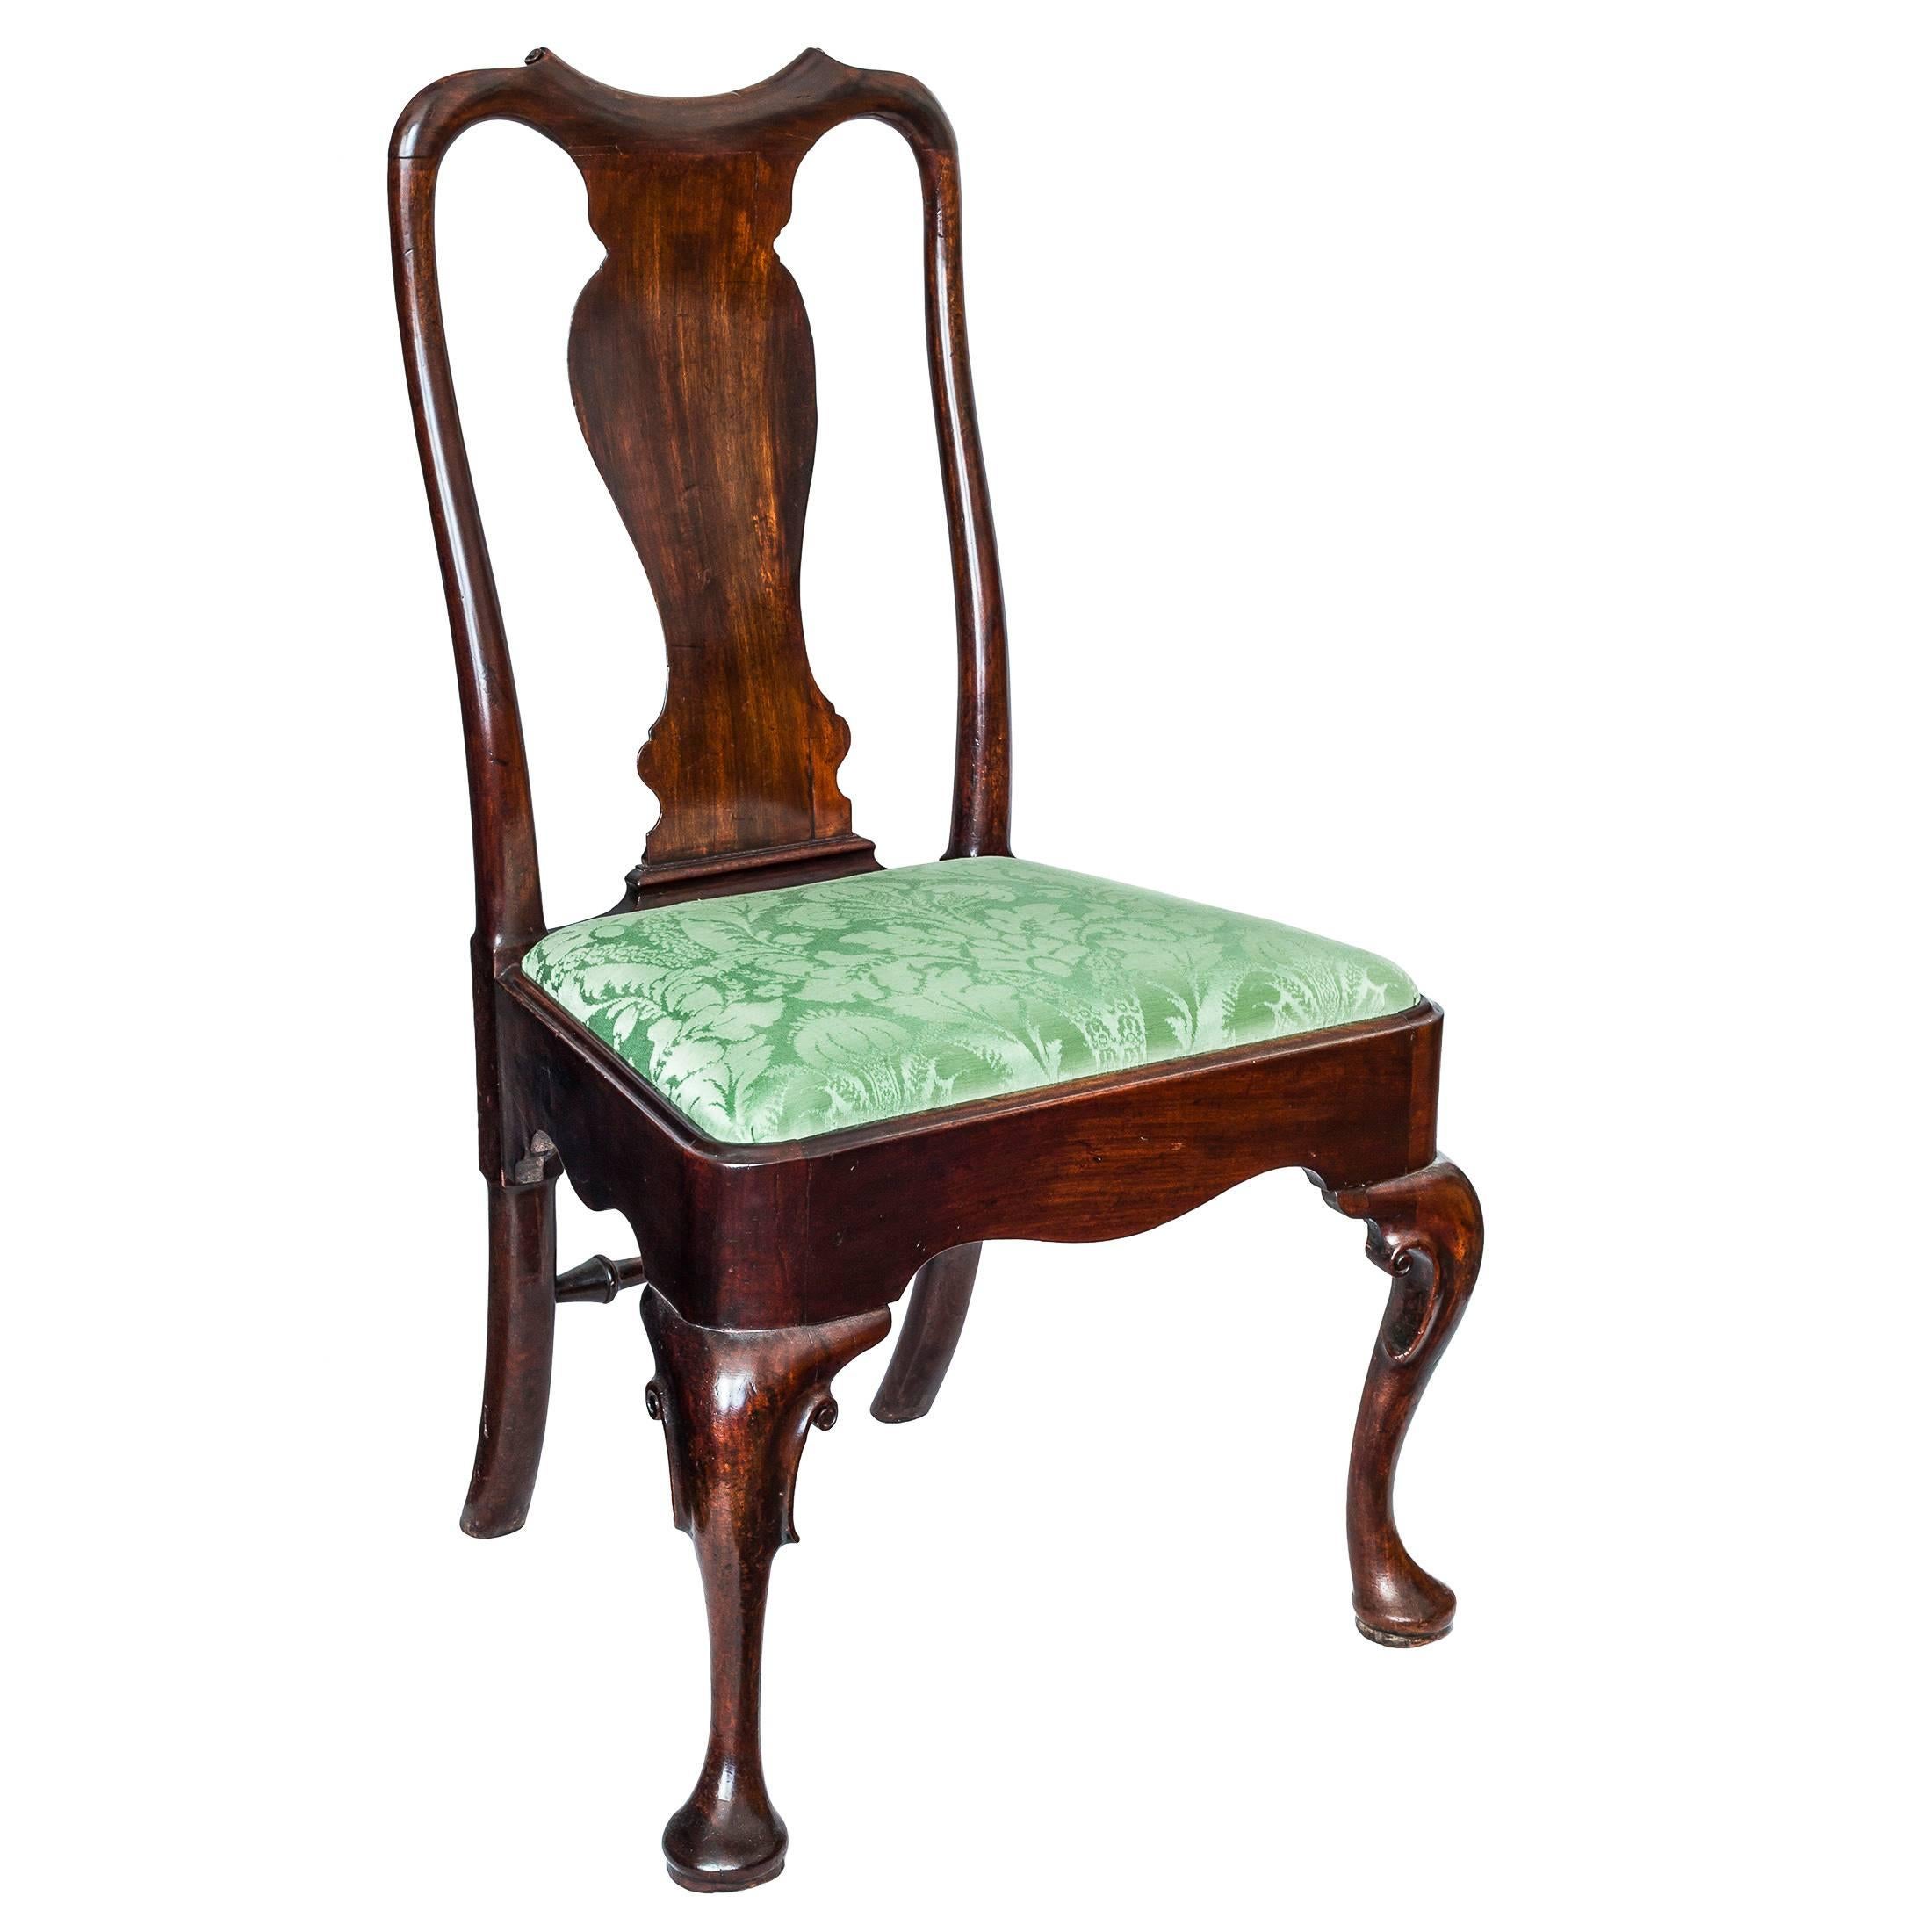 A pair of early to mid-18th century George II period side chairs in solid mahogany, of generous proportion, great color and superb patination,

English, circa 1730s

Great quality chairs, of a rare and attractive form, having the well-curved